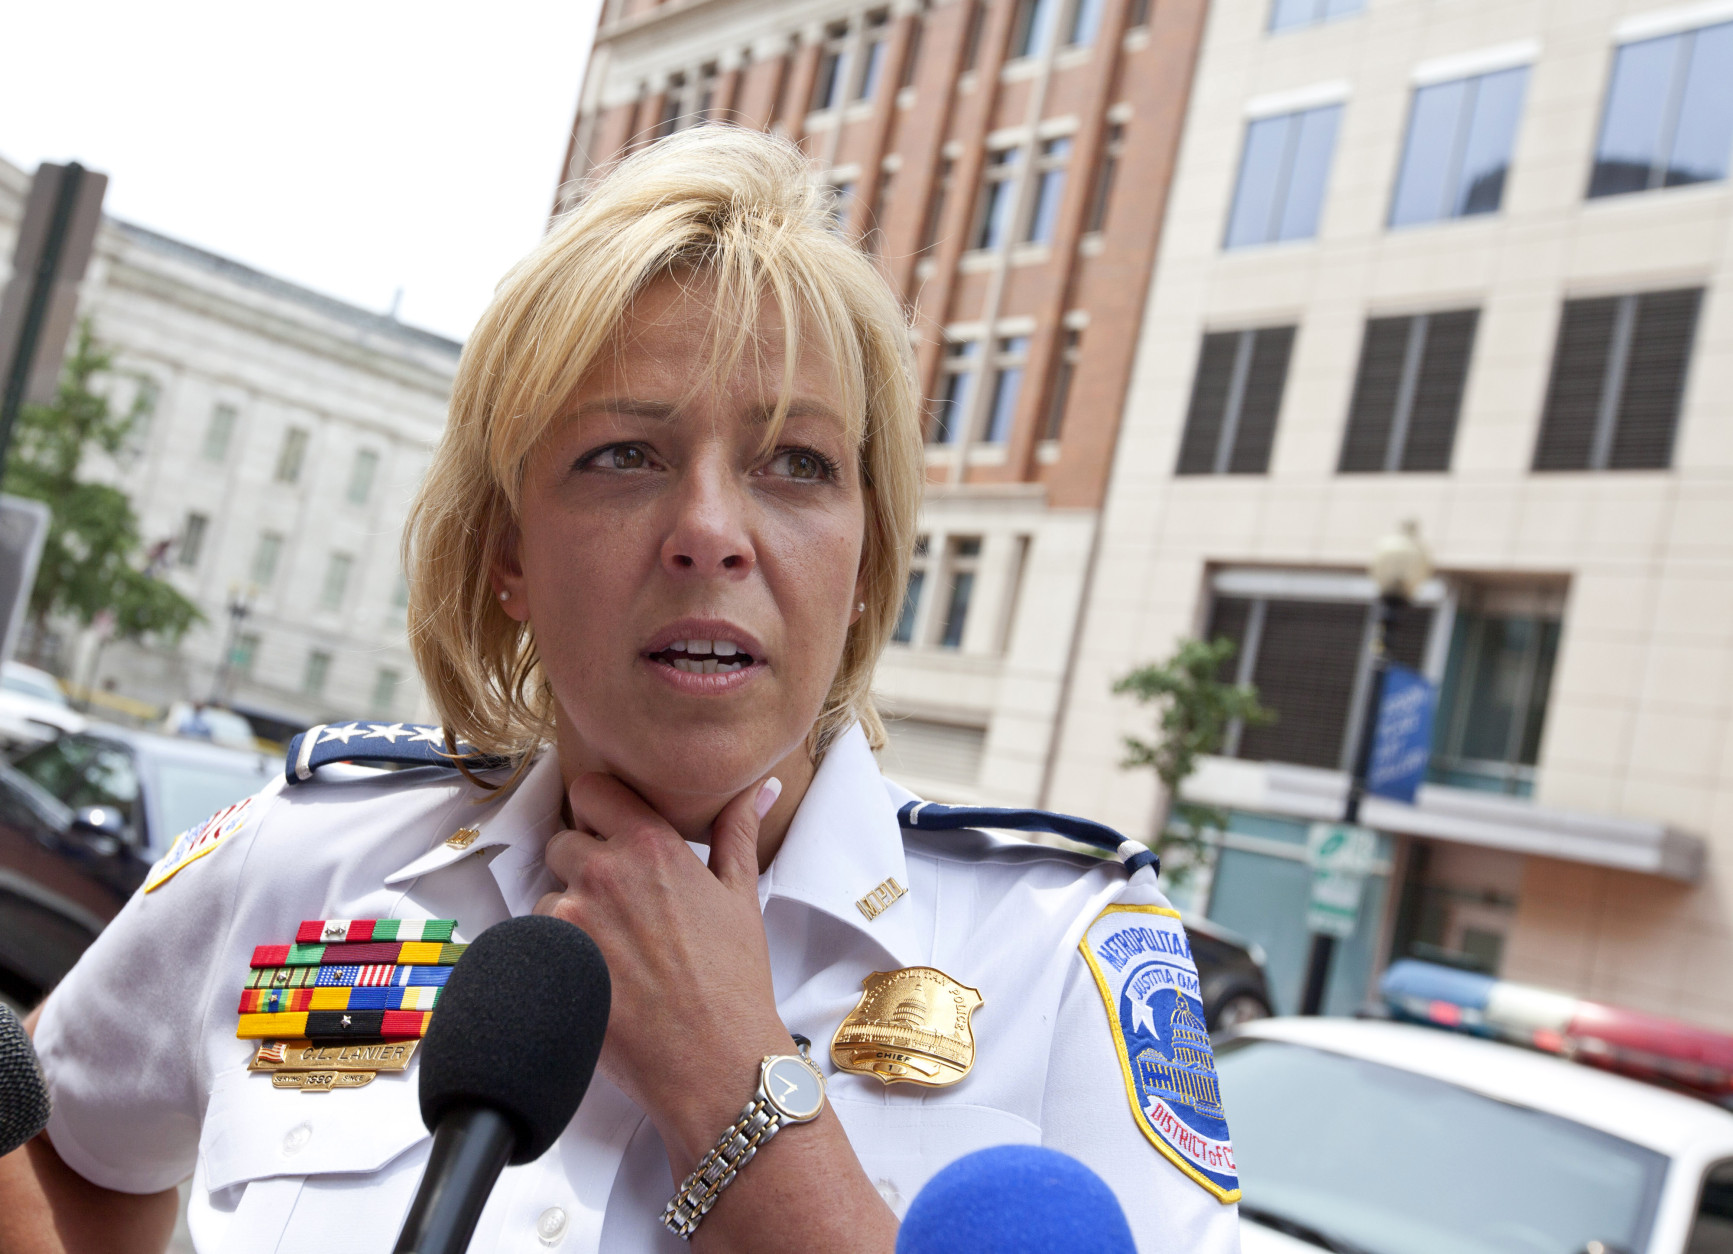 FILE - This Aug. 15, 2012 file photo shows Washington Police Chief Cathy Lanier meeting with reporters in Washington. Washington's murder rate was approaching nearly 500 slayings a year in the early 1990s, the annual rate has gradually declined to the point that the city is now on the verge of a once-unthinkable milestone. The number of 2012 killings in the District of Columbia stands at 78 and is on pace to finish lower than 100 for the first time since 1963, police records show.  (AP Photo/J. Scott Applewhite, File)